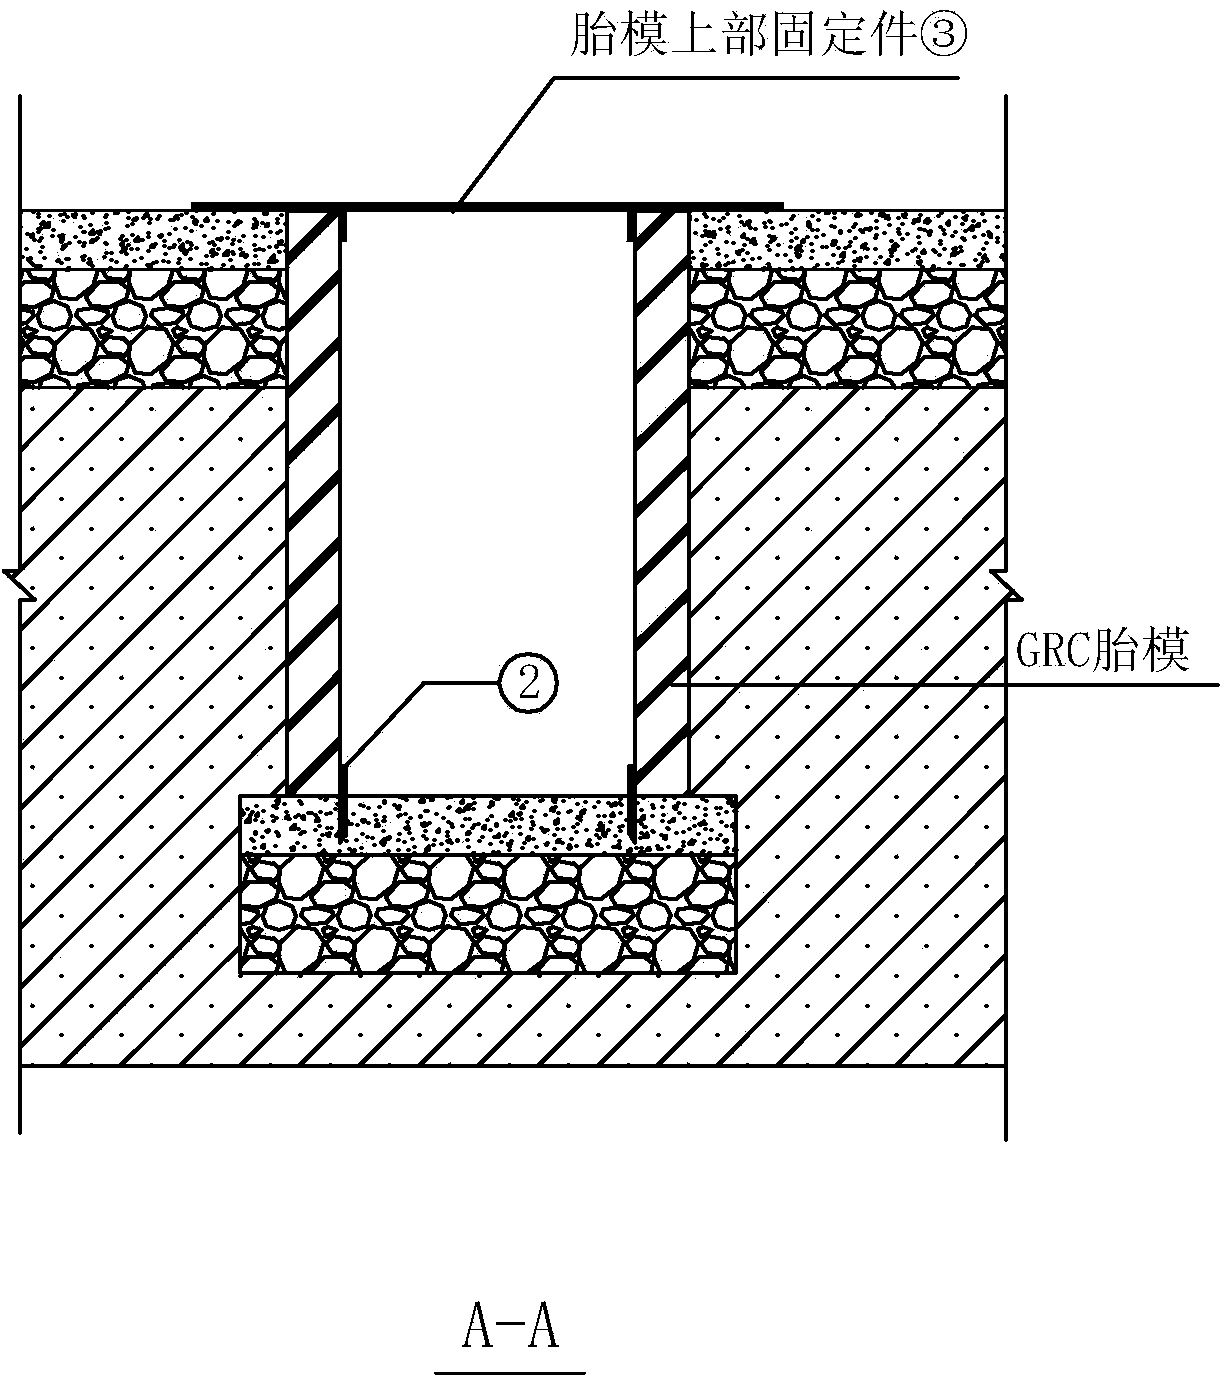 Construction method for brick forms of foundation platforms and grade beams